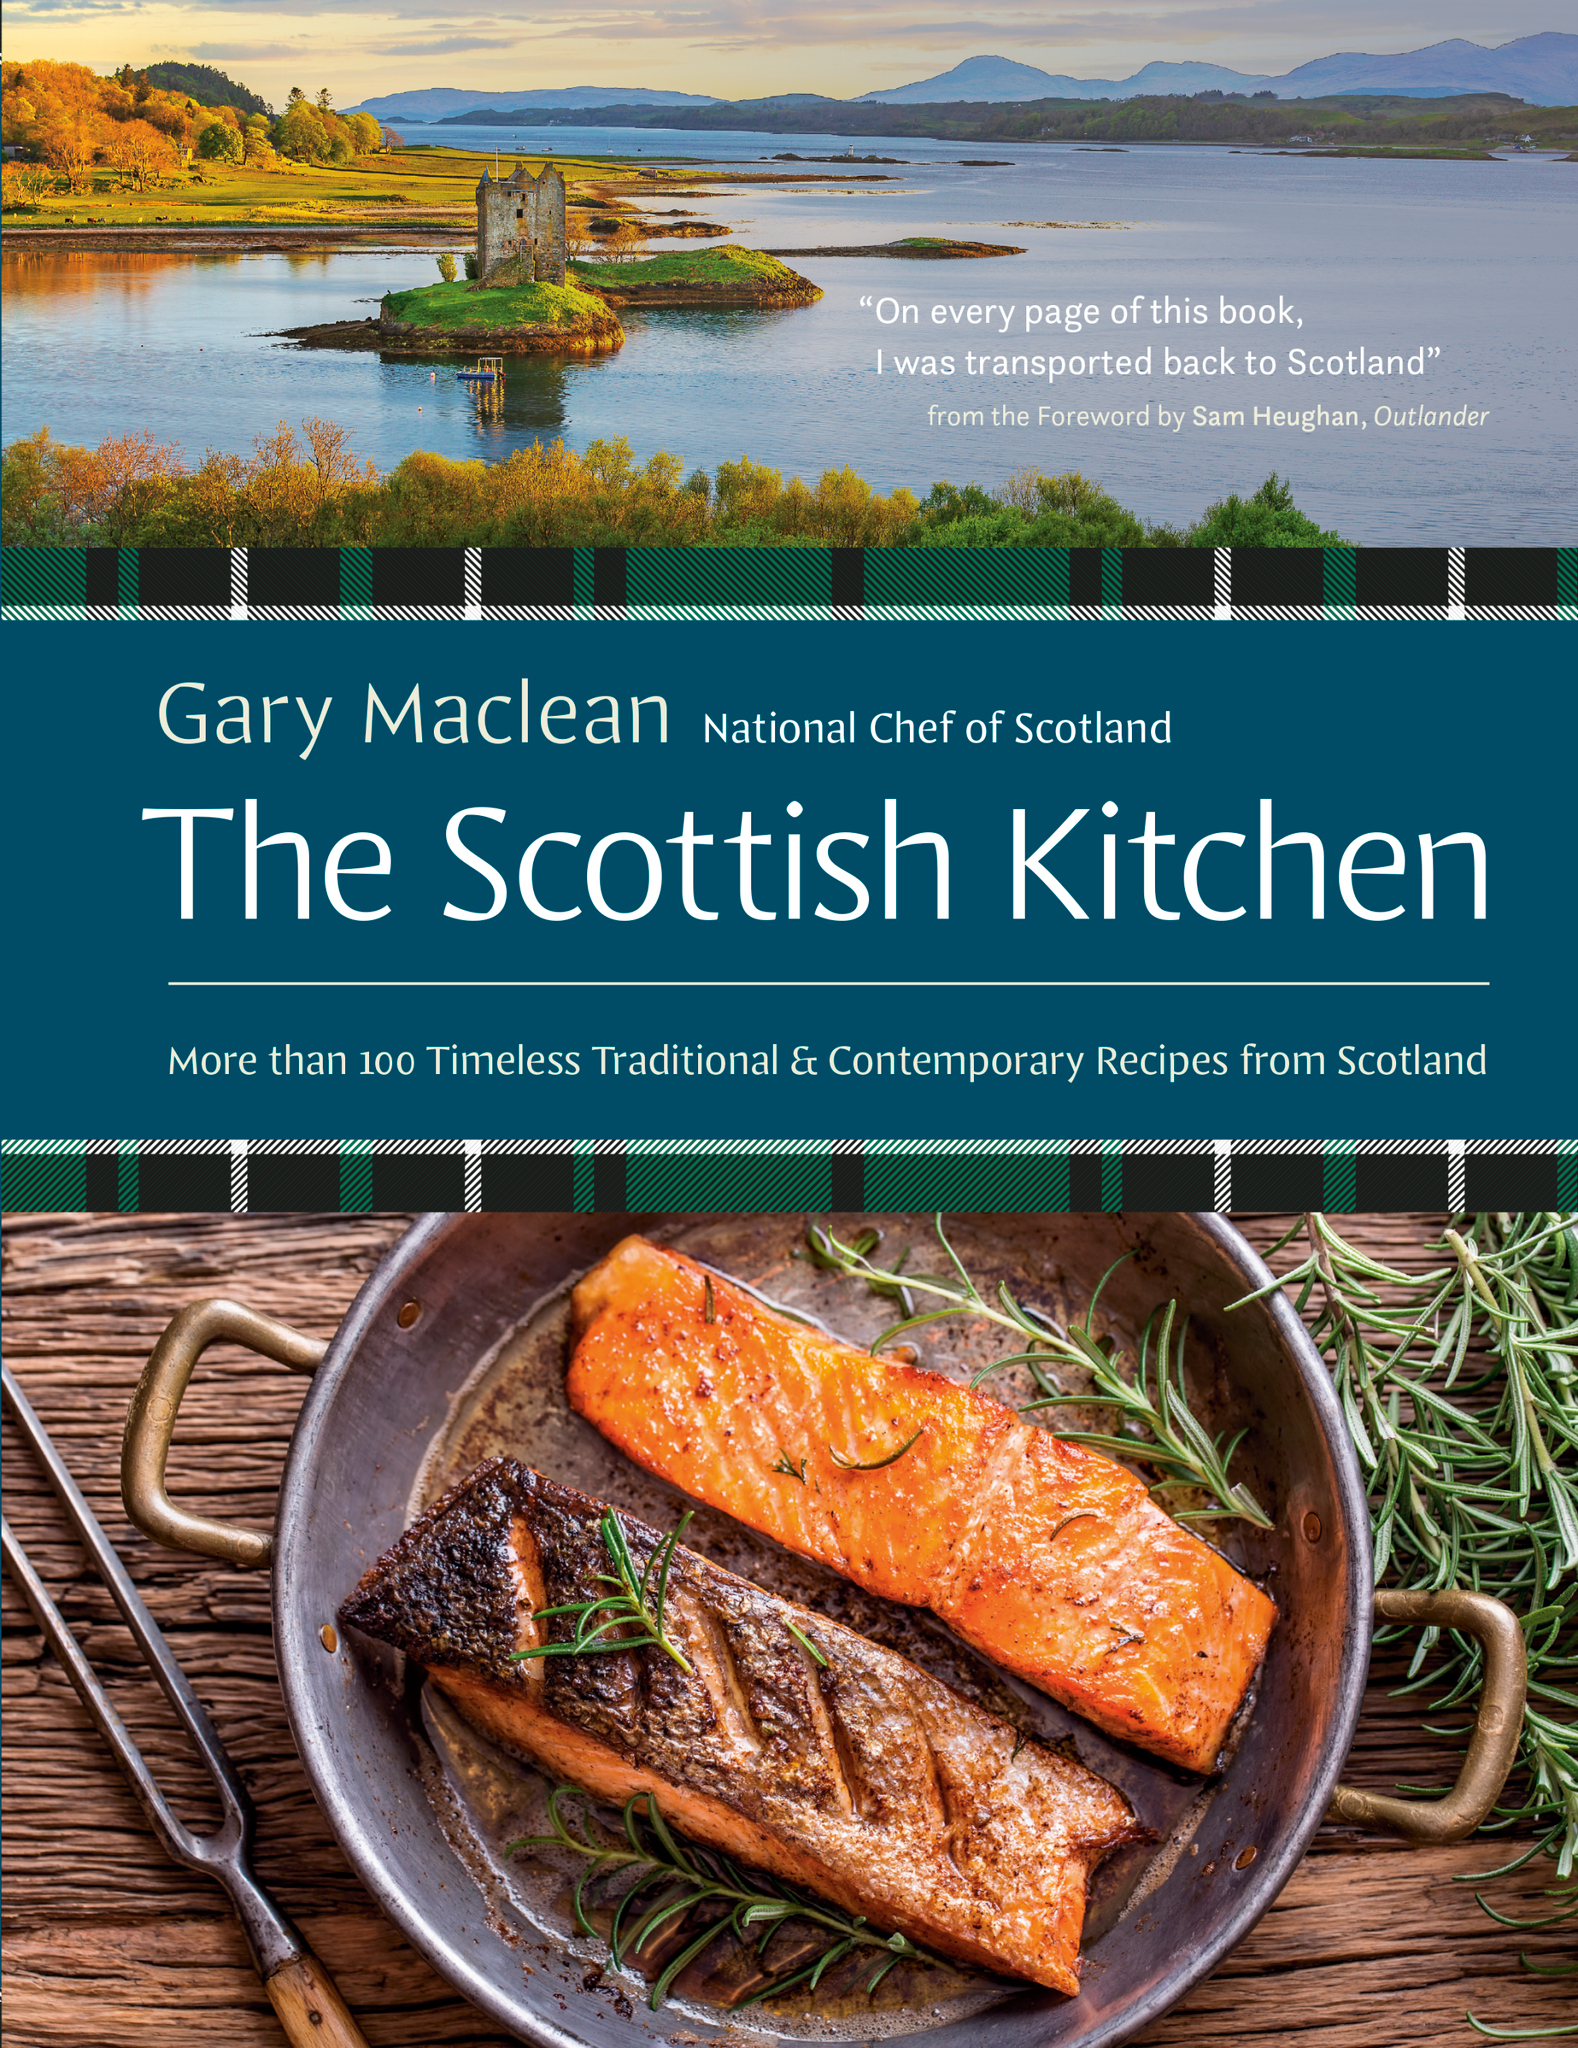 The Scottish Kitchen by Gary Maclean, Scotlands National Chef | Penguin Books | Scottish Creations